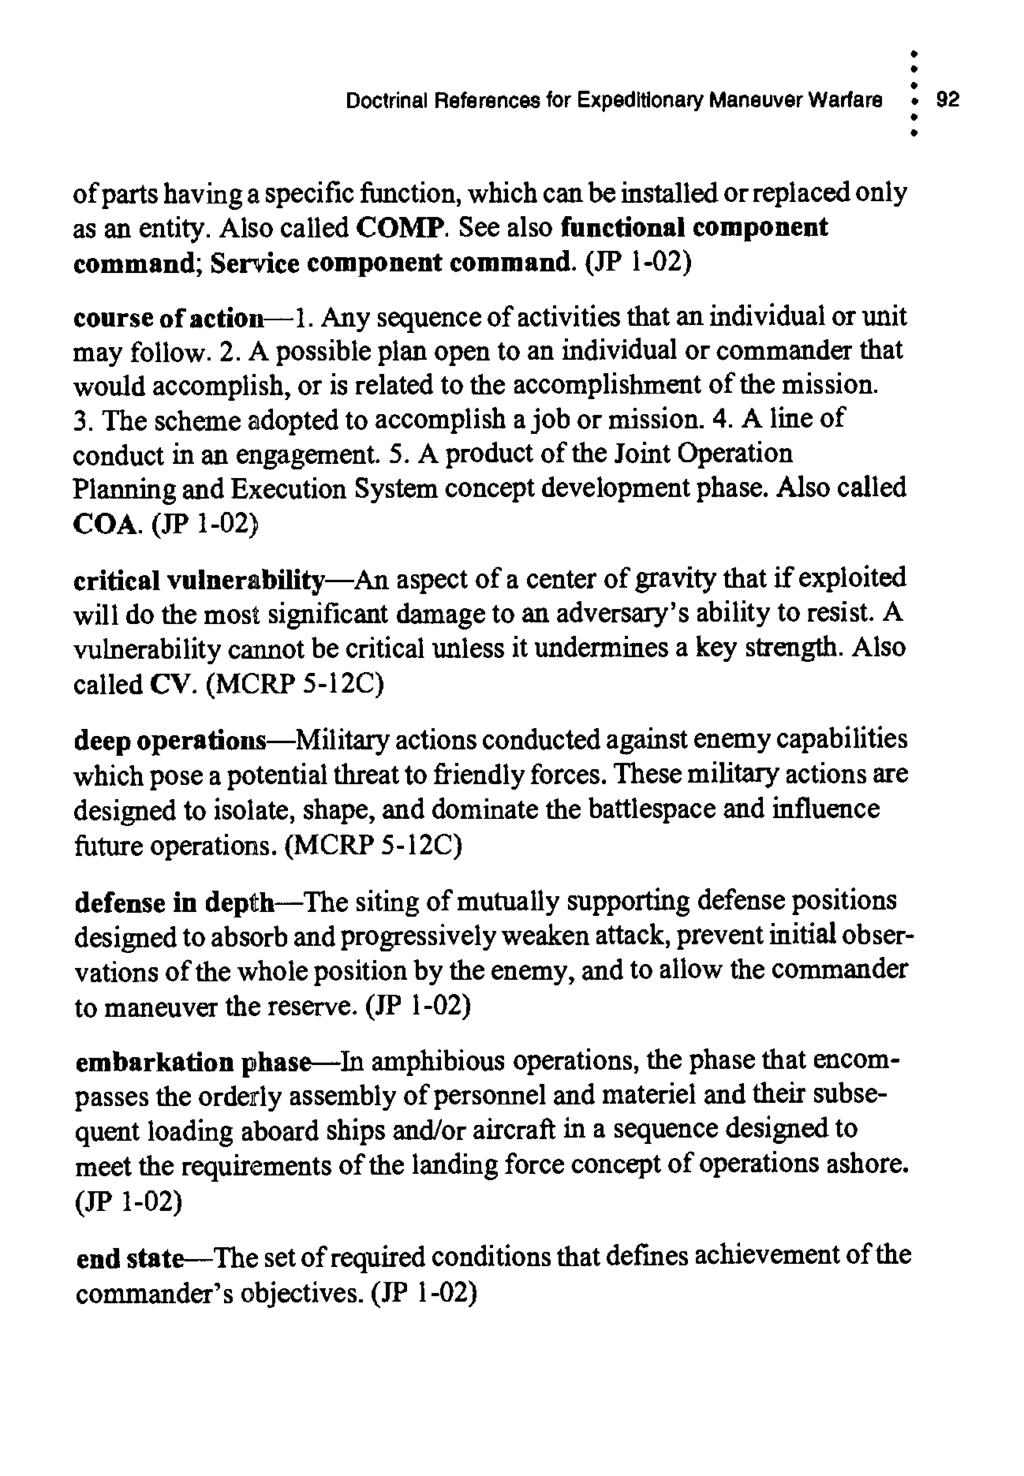 Doctrinal References for Expeditionary Maneuver Warfare 92 ofparts having a specific function, which can be installed or replaced only as an entity. Also called COMP.